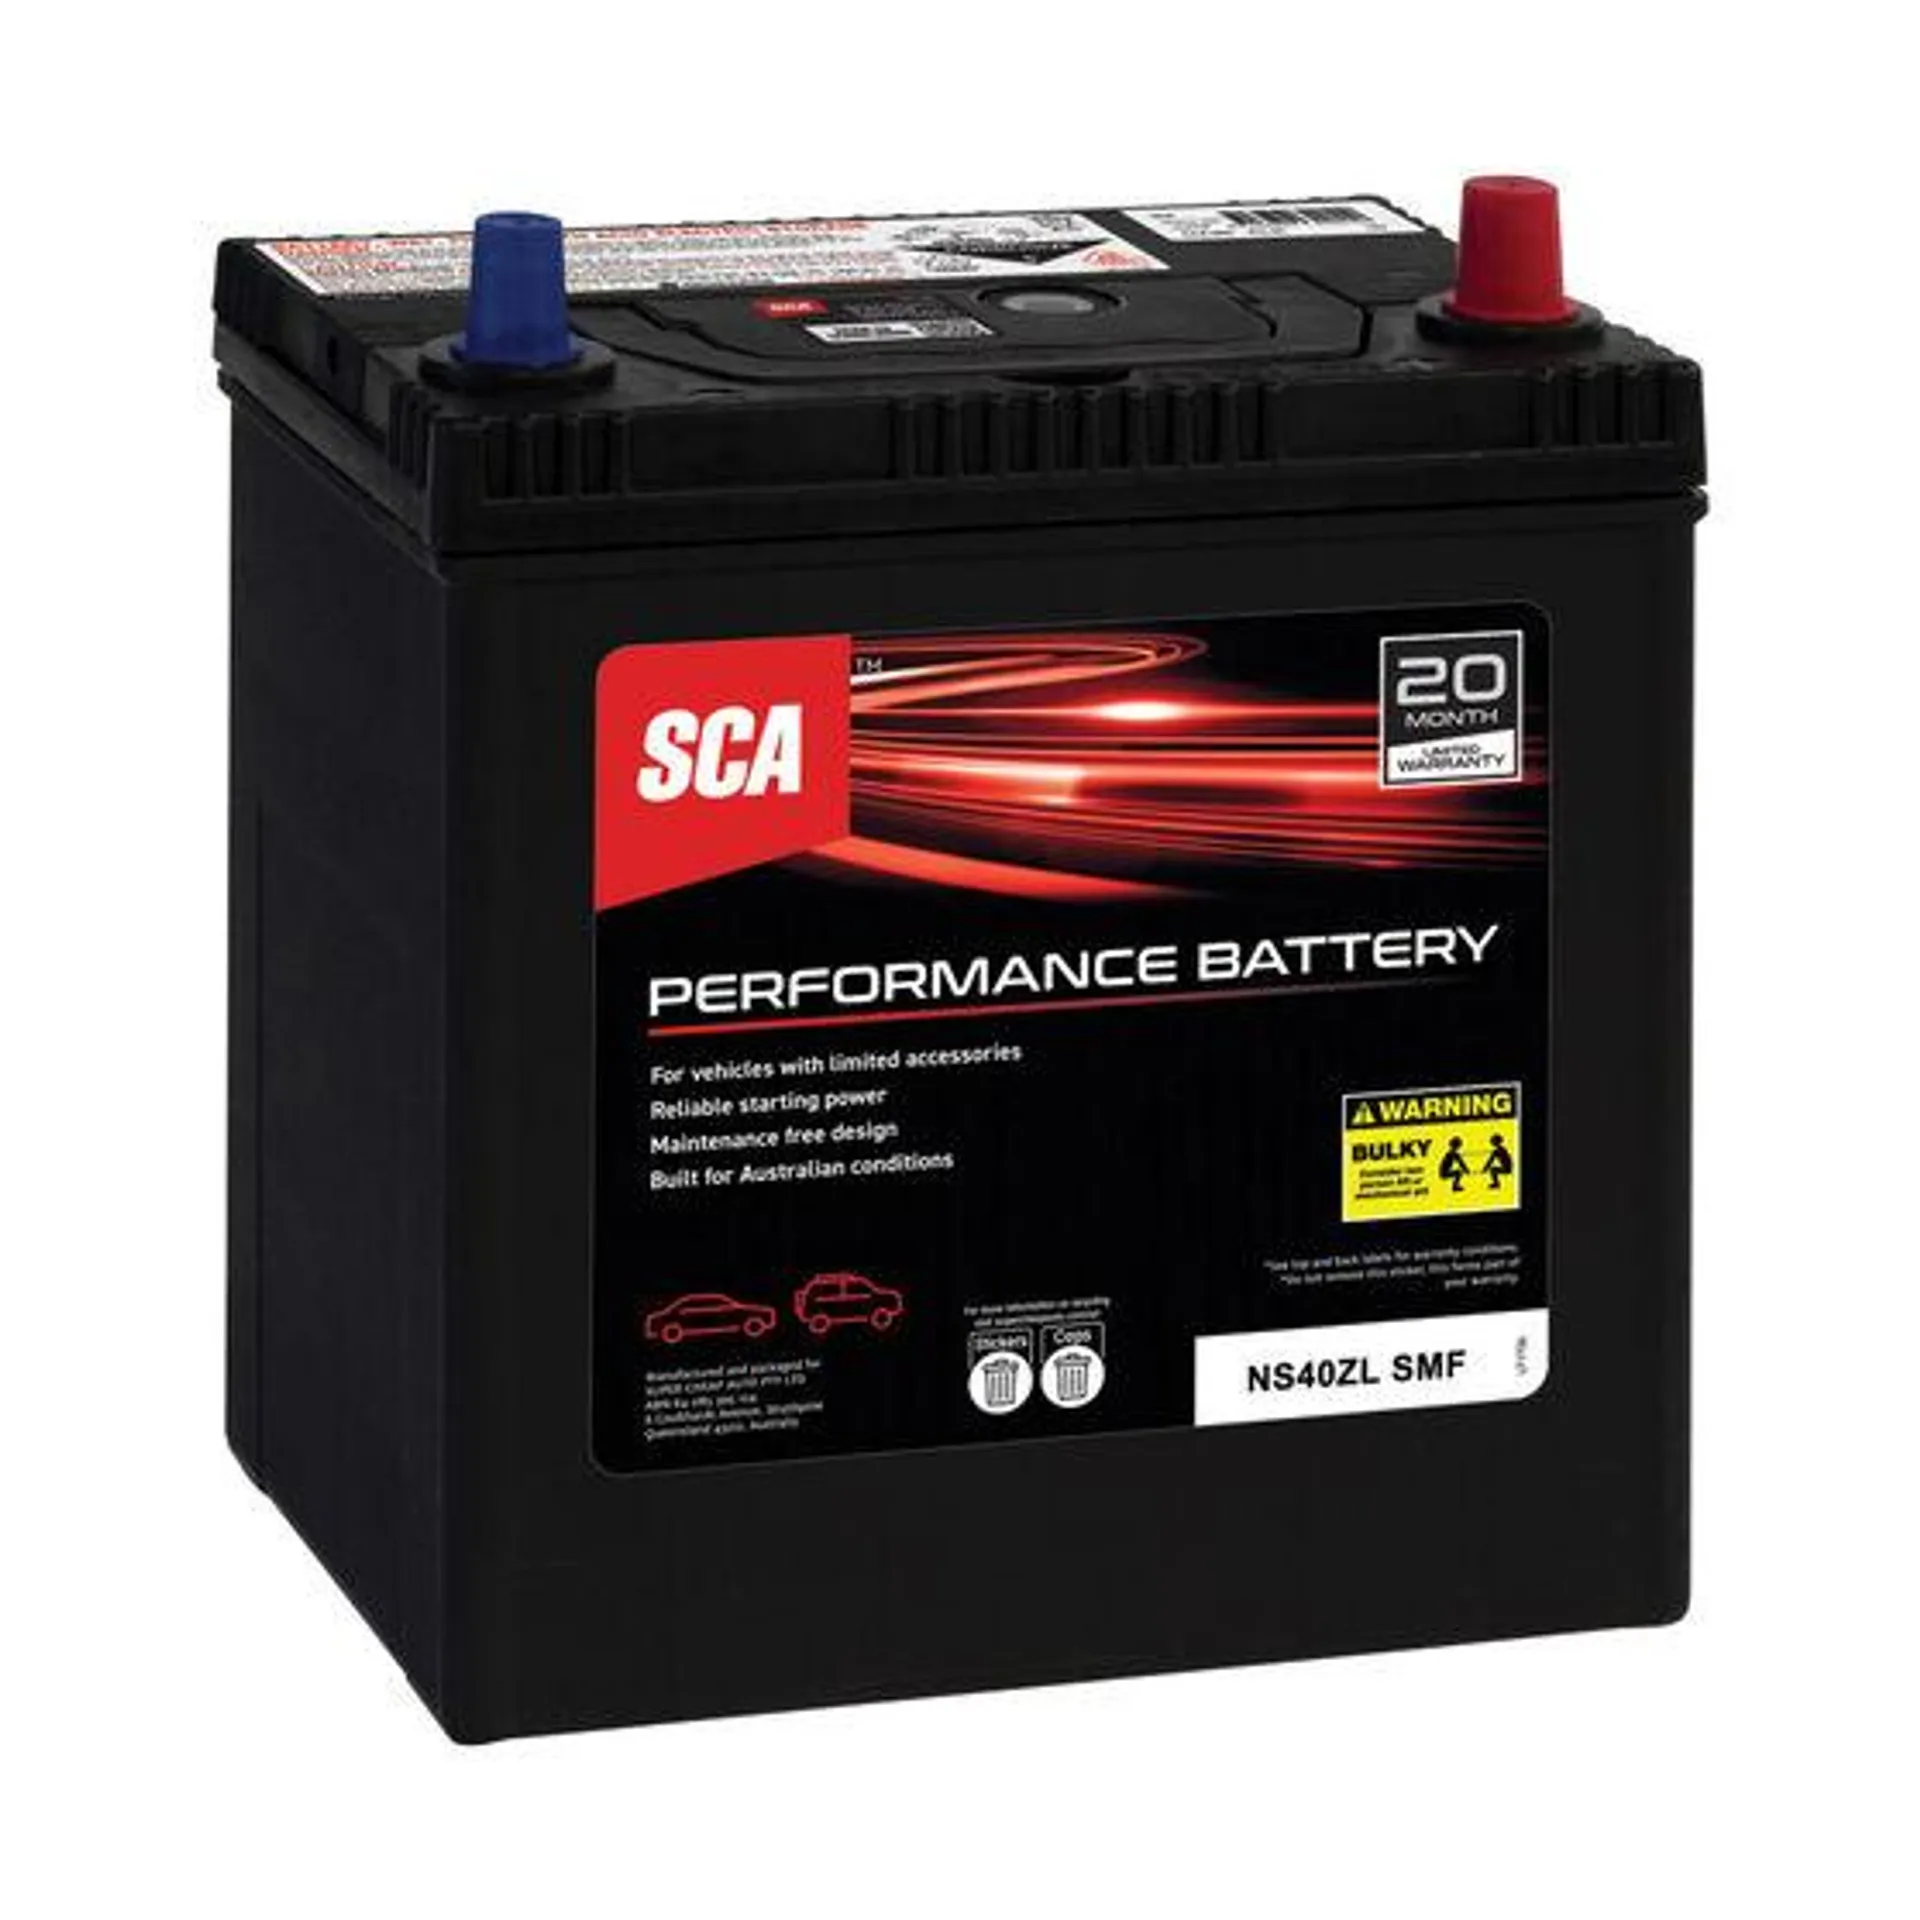 SCA Performance Car Battery NS40ZL SMF